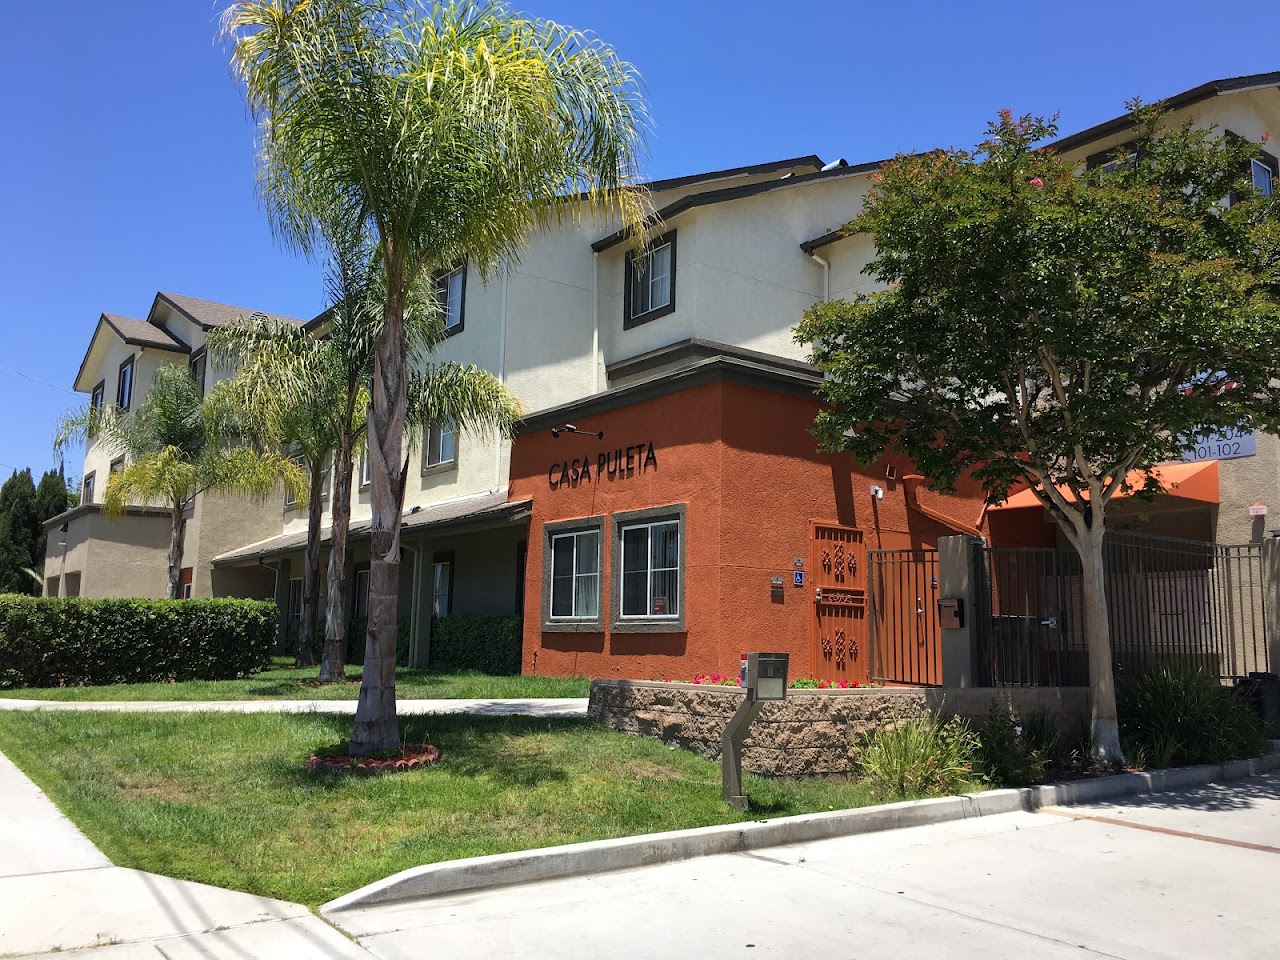 Photo of CASA PULETA APTS. Affordable housing located at 1445 S 45TH ST SAN DIEGO, CA 92113